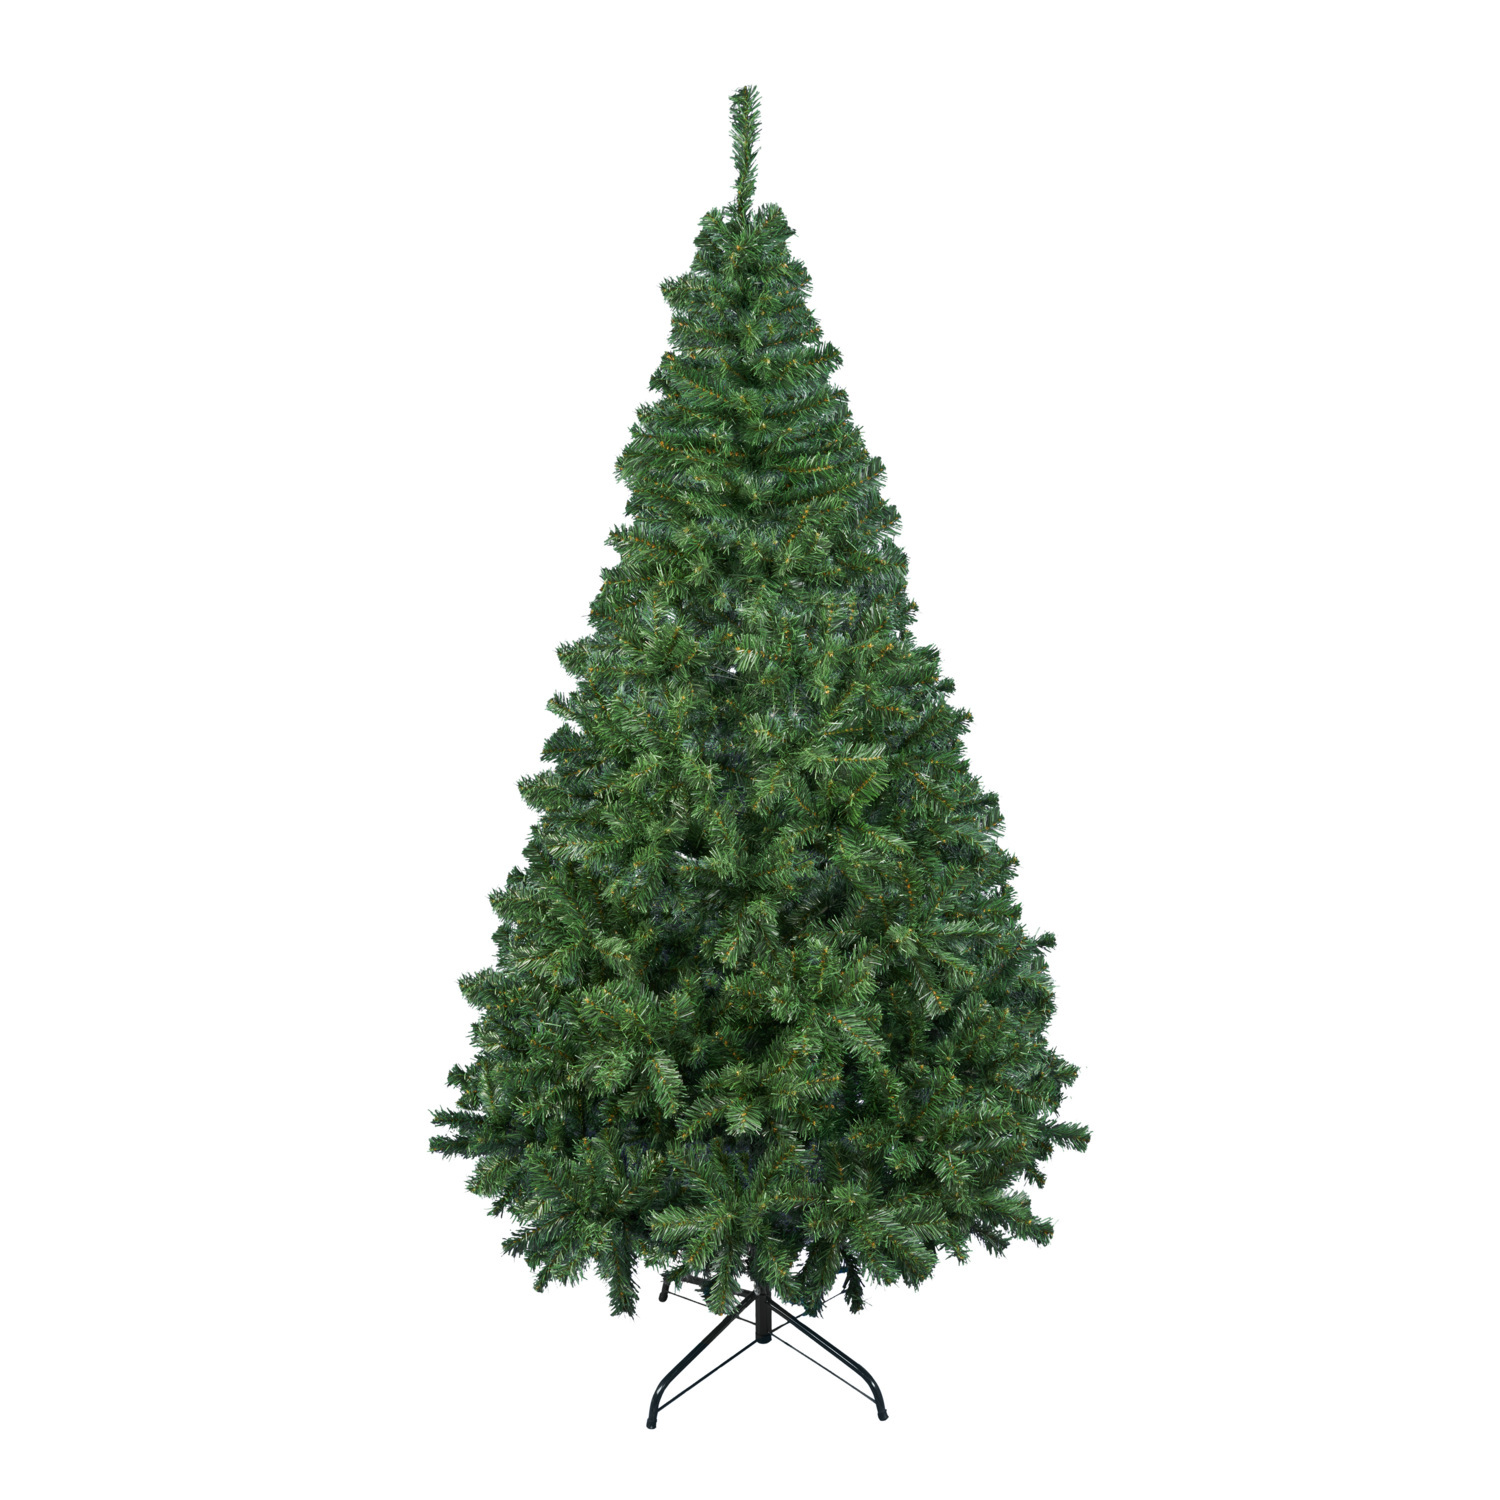 Norway Spruce Artifical Christmas Tree 7ft Image 2